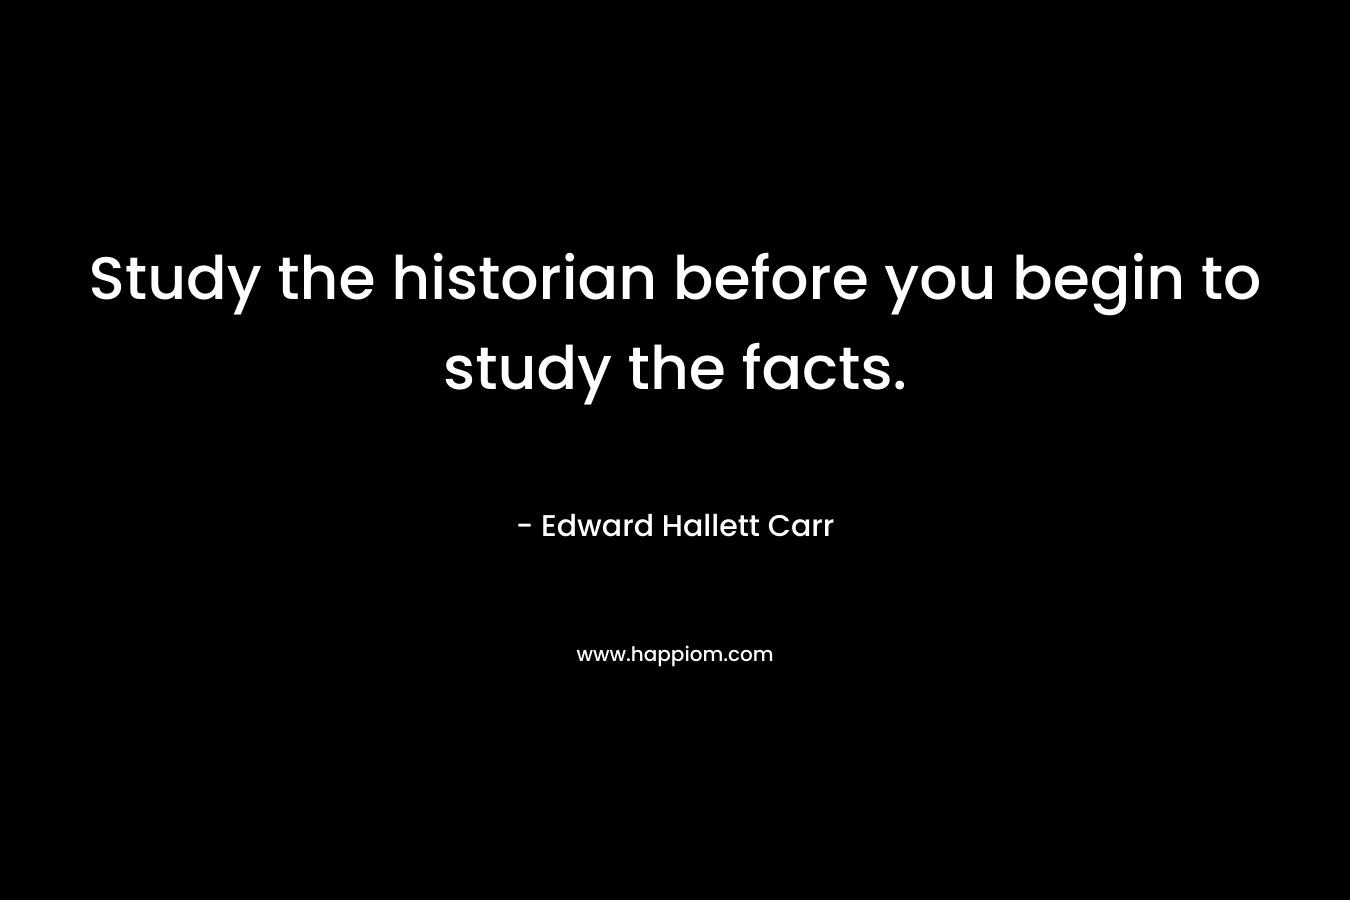 Study the historian before you begin to study the facts. – Edward Hallett Carr